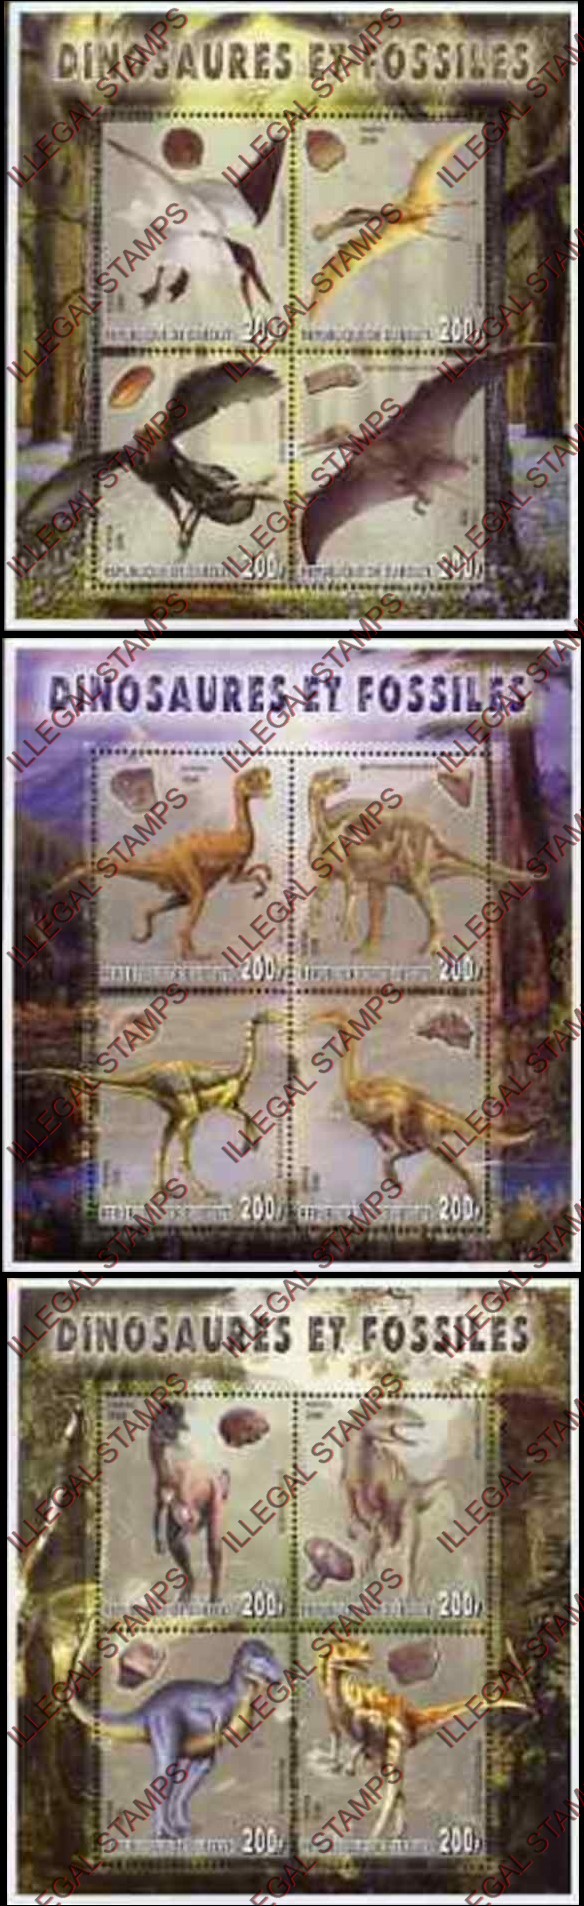 Djibouti 2006 Dinosaurs and Fossils Illegal Stamp Souvenir Sheets of 4